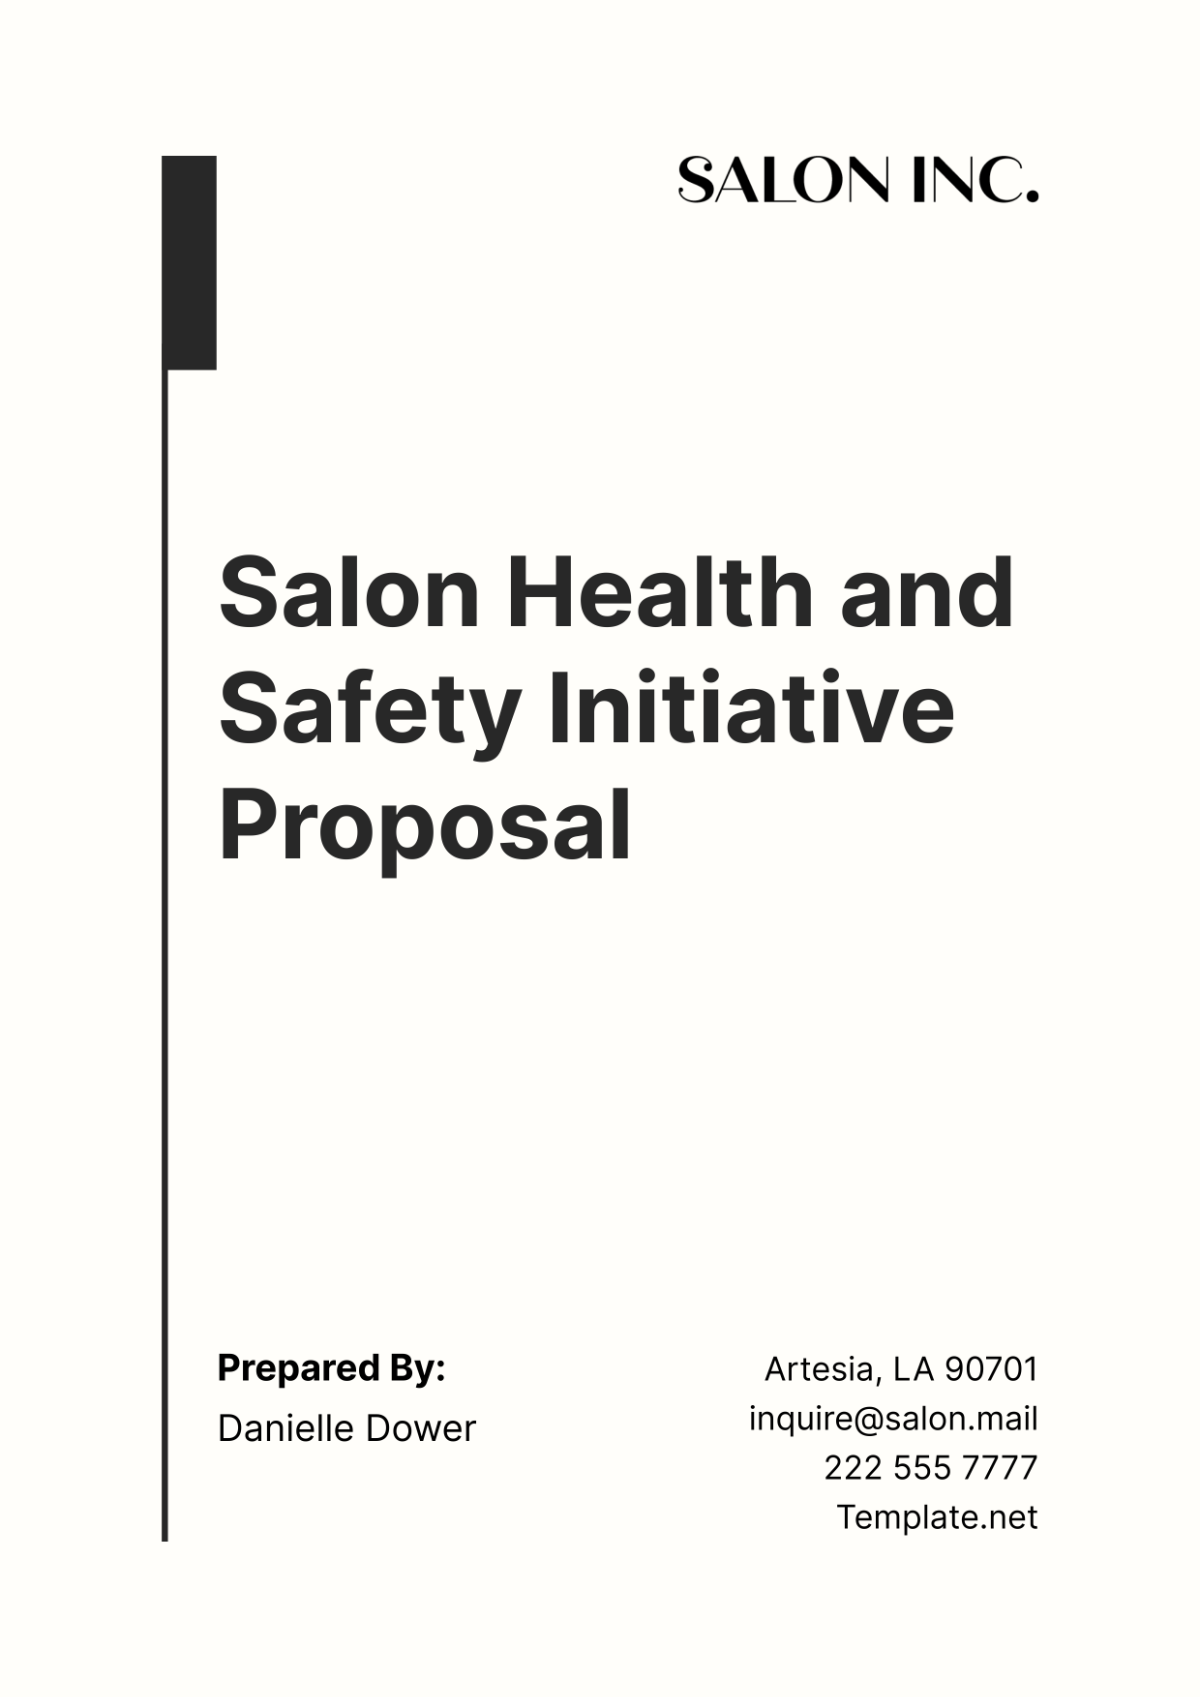 Free Salon Health and Safety Initiative Proposal Template